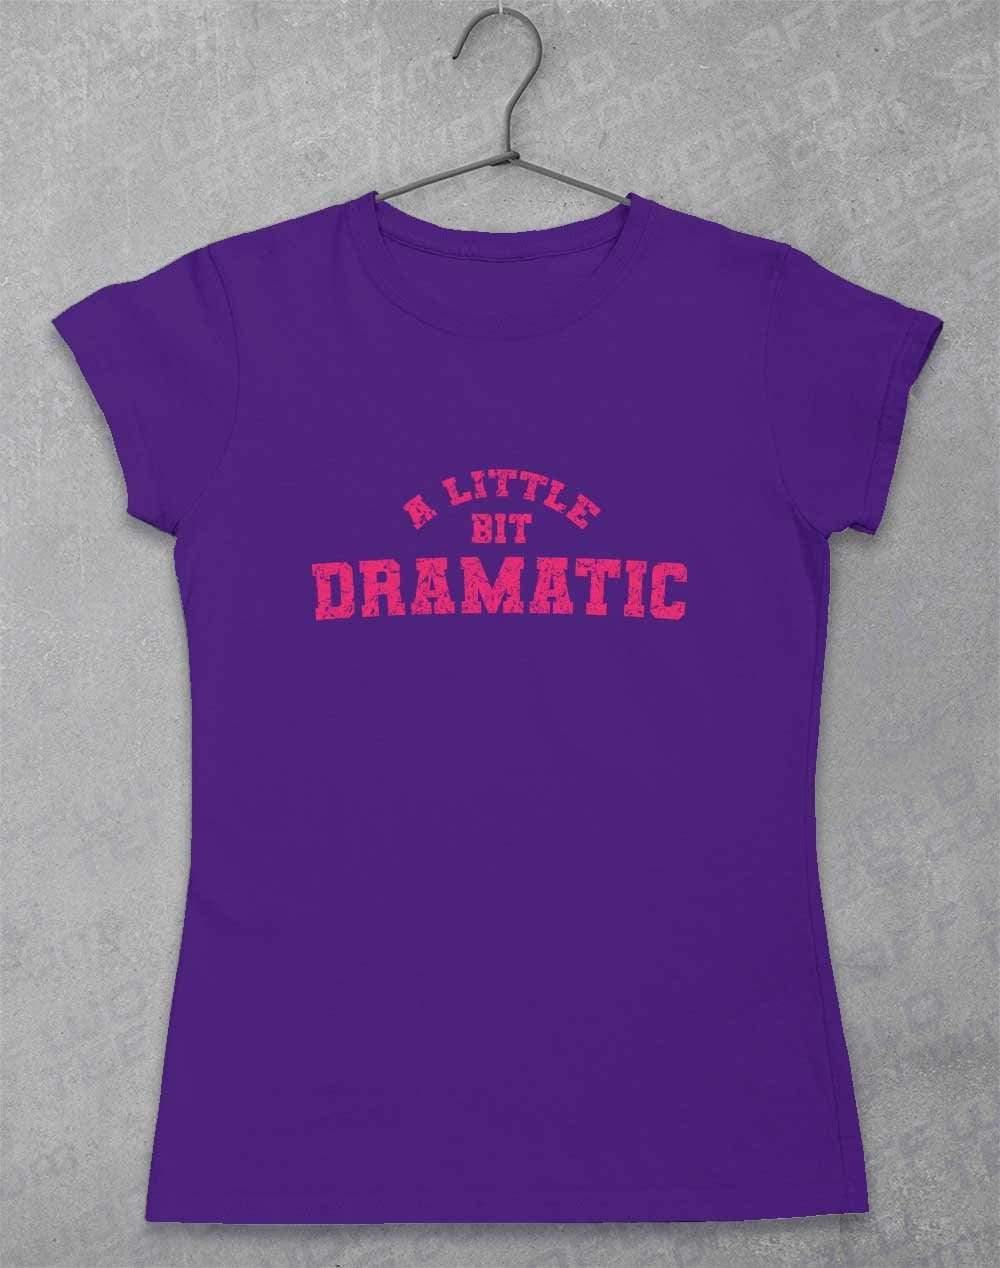 A Little Bit Dramatic Distressed Womens T-Shirt 8-10 / Lilac  - Off World Tees